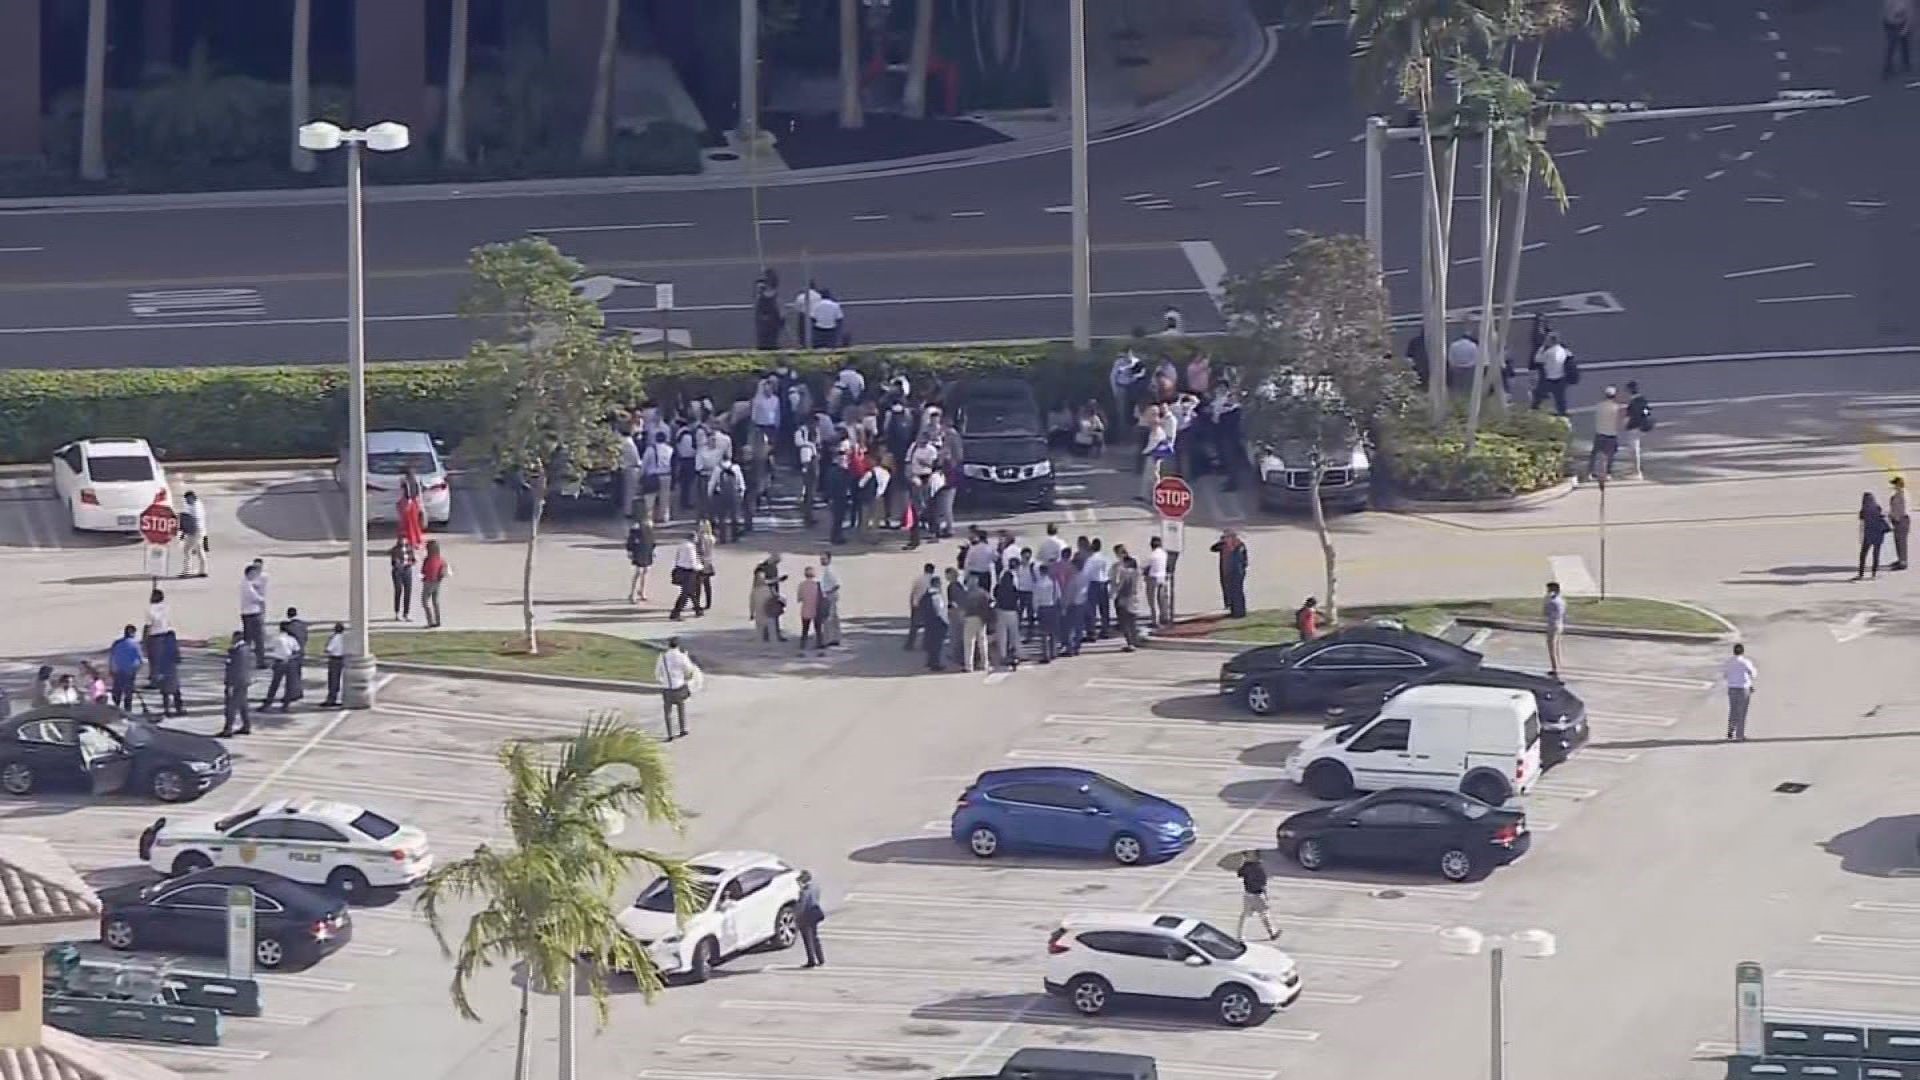 People in Miami gather outside after reports of buildings shaking following the 7.7 magnitude earthquake in the Caribbean Sea.